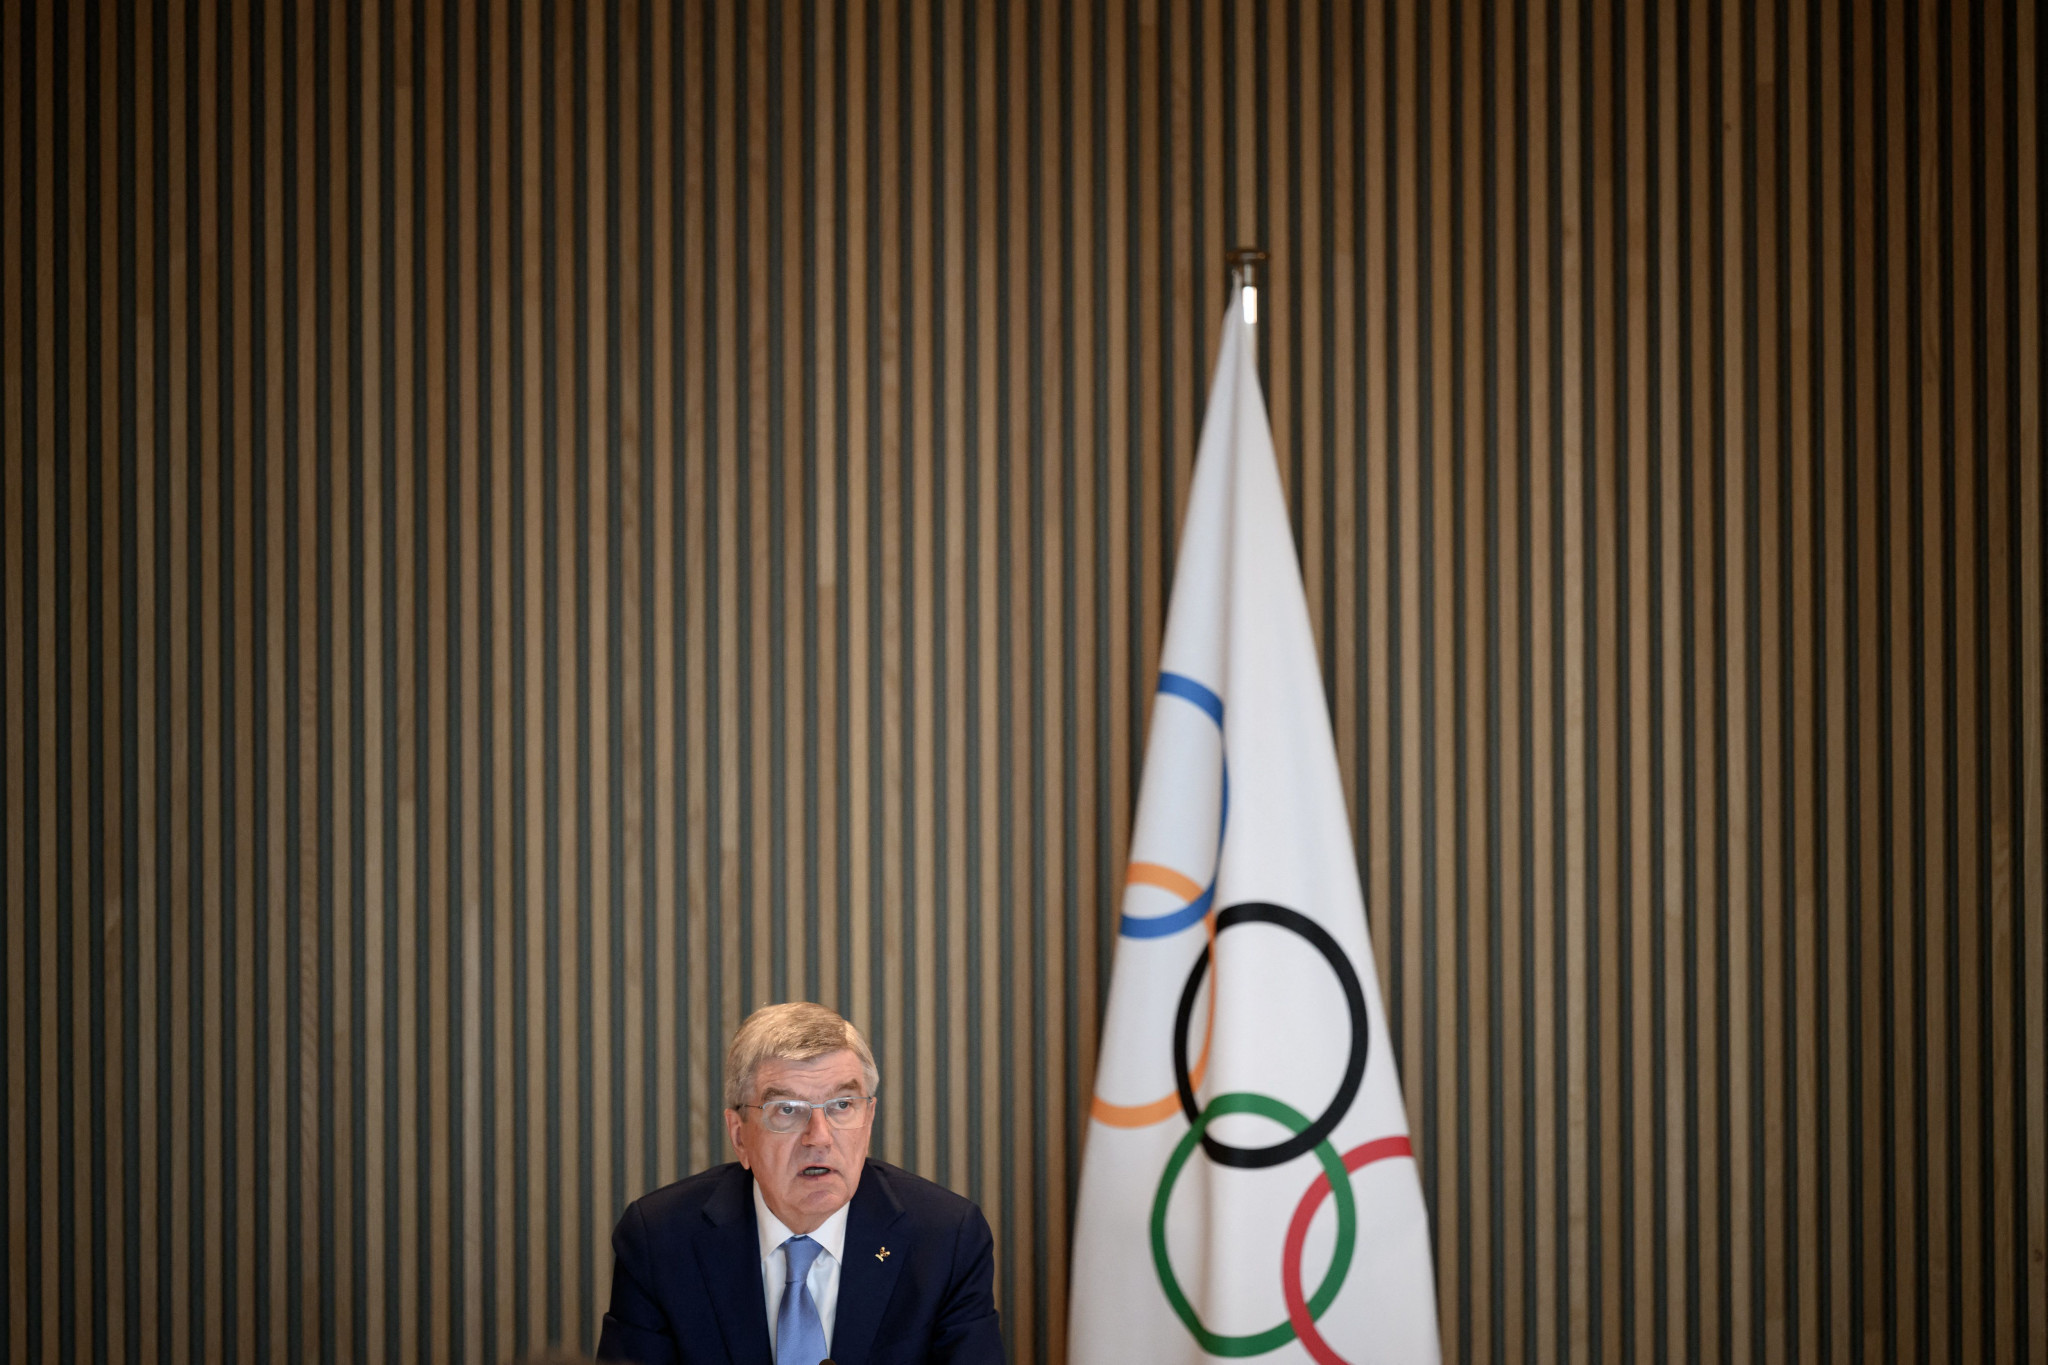 Governments "deplorable" for criticism of IOC's Russia stance, Bach says